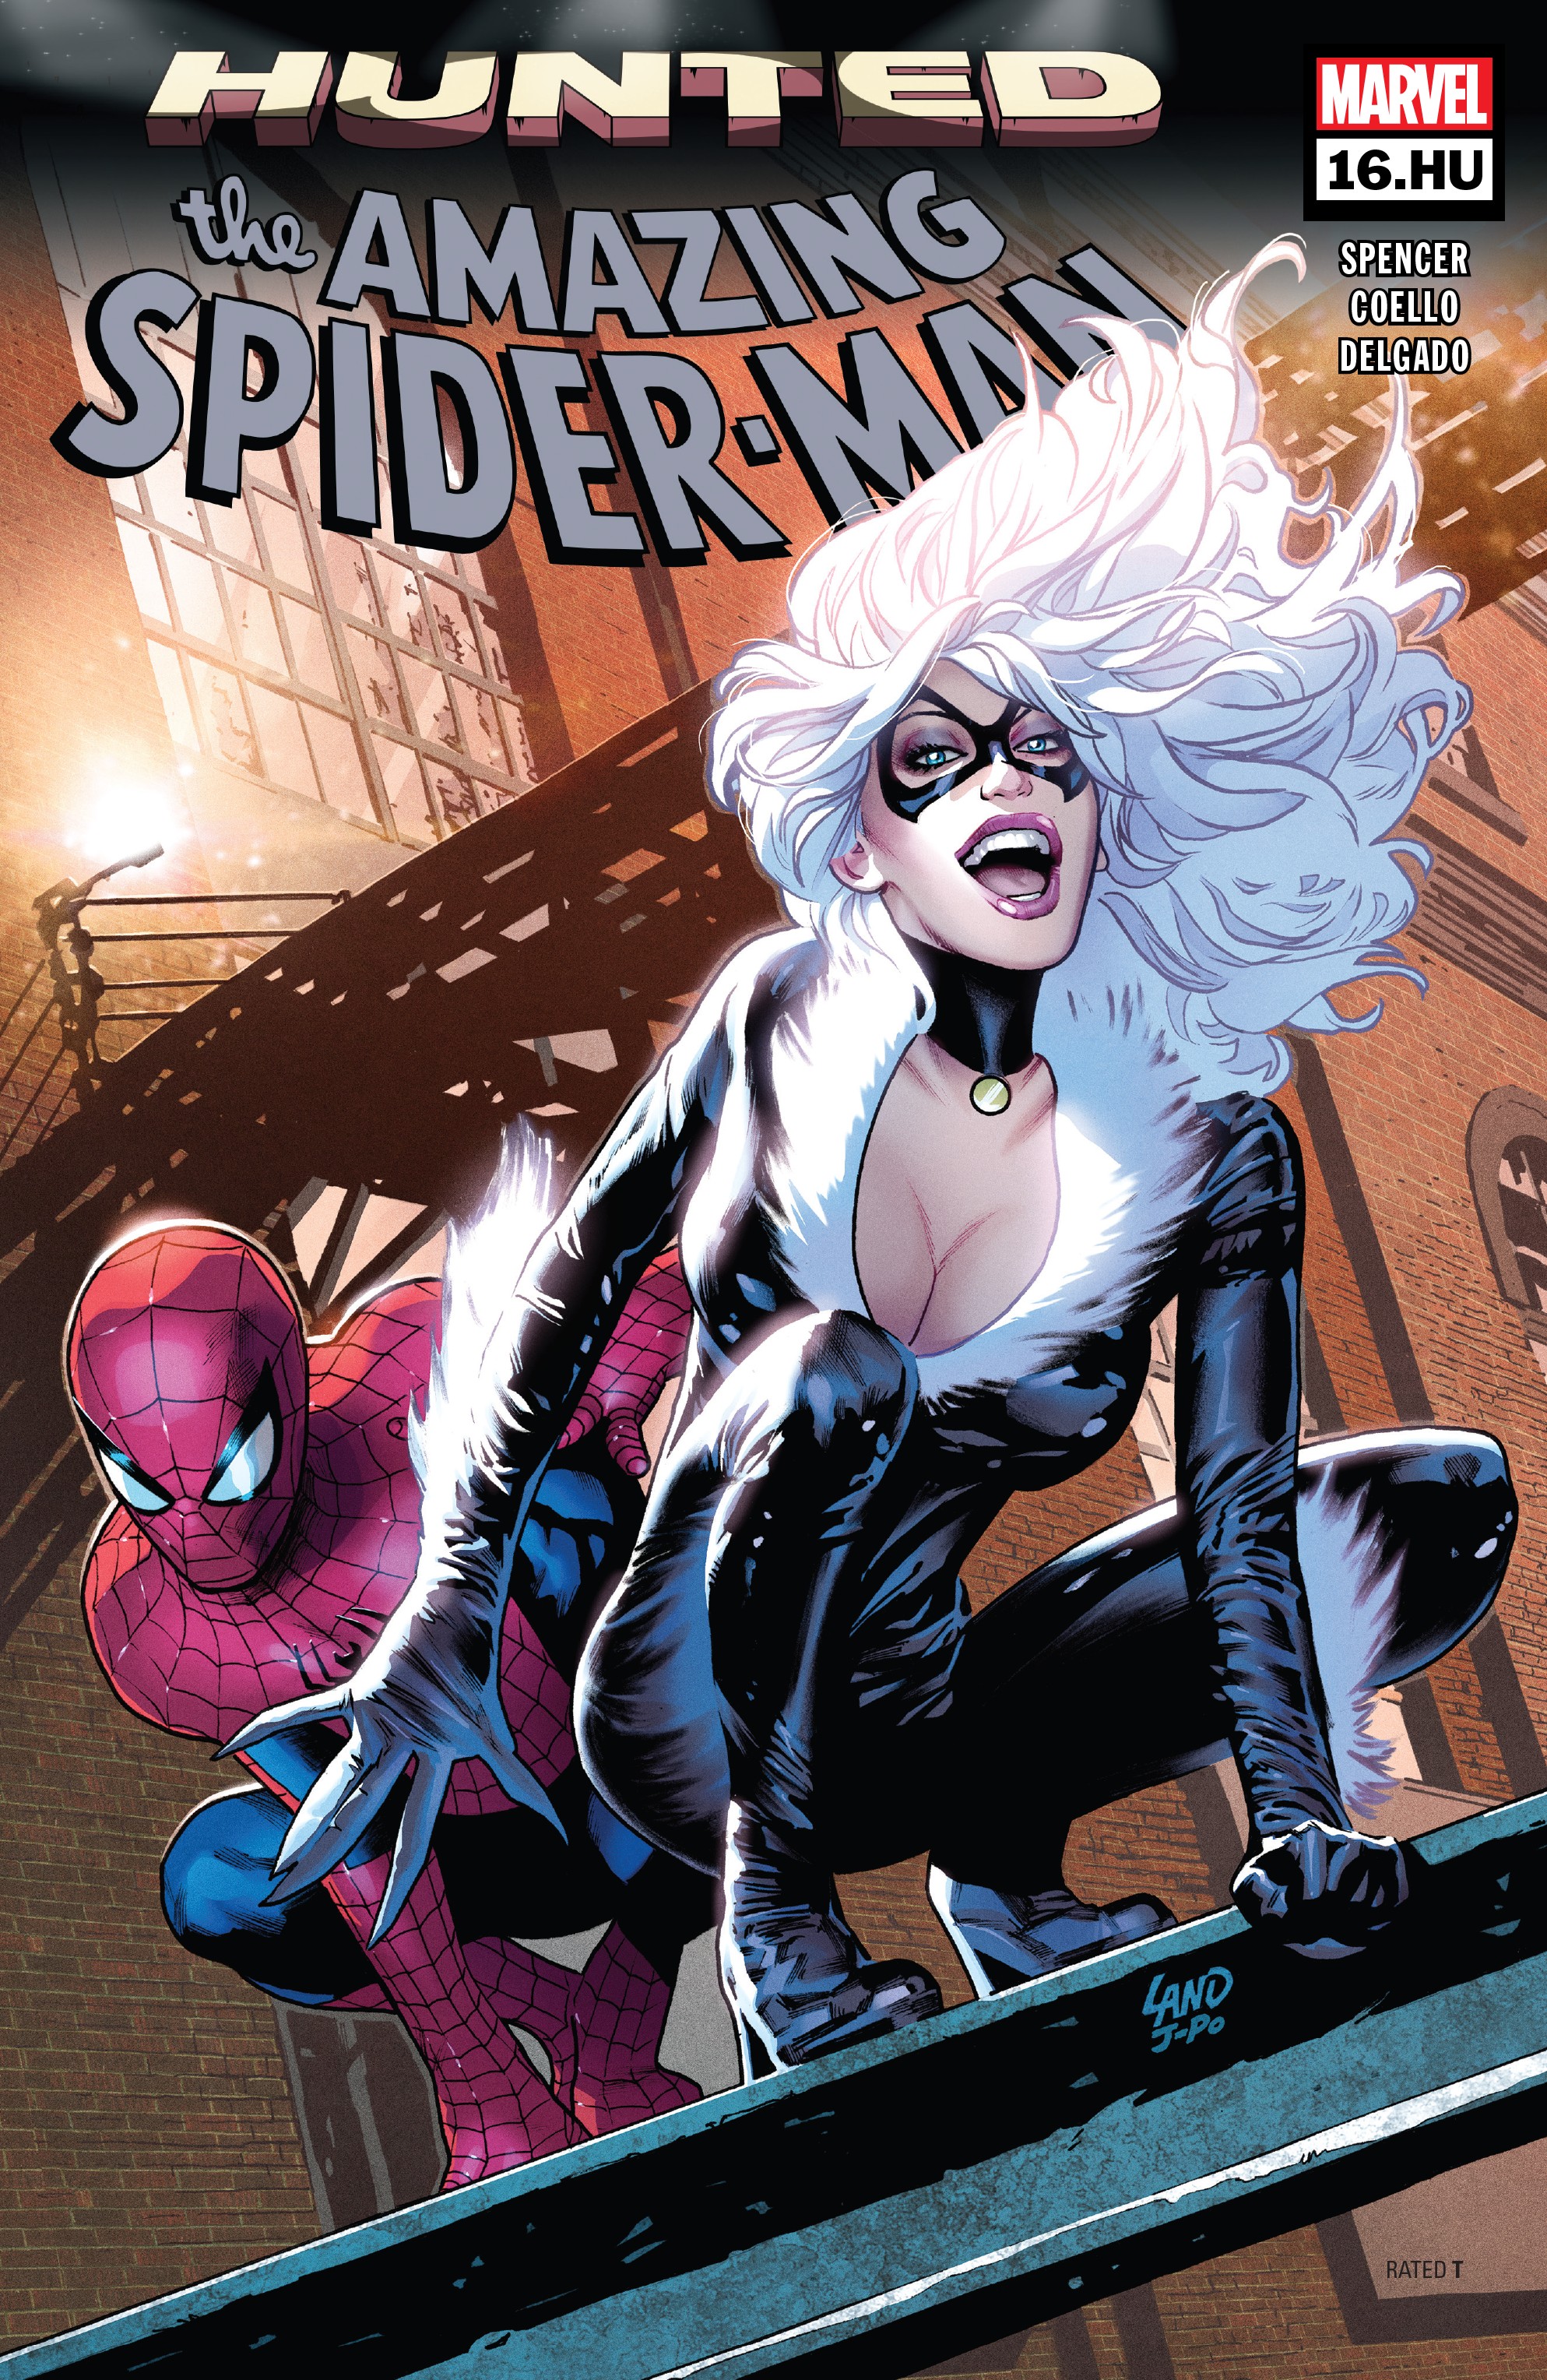 Read online The Amazing Spider-Man (2018) comic -  Issue #16.HU - 1